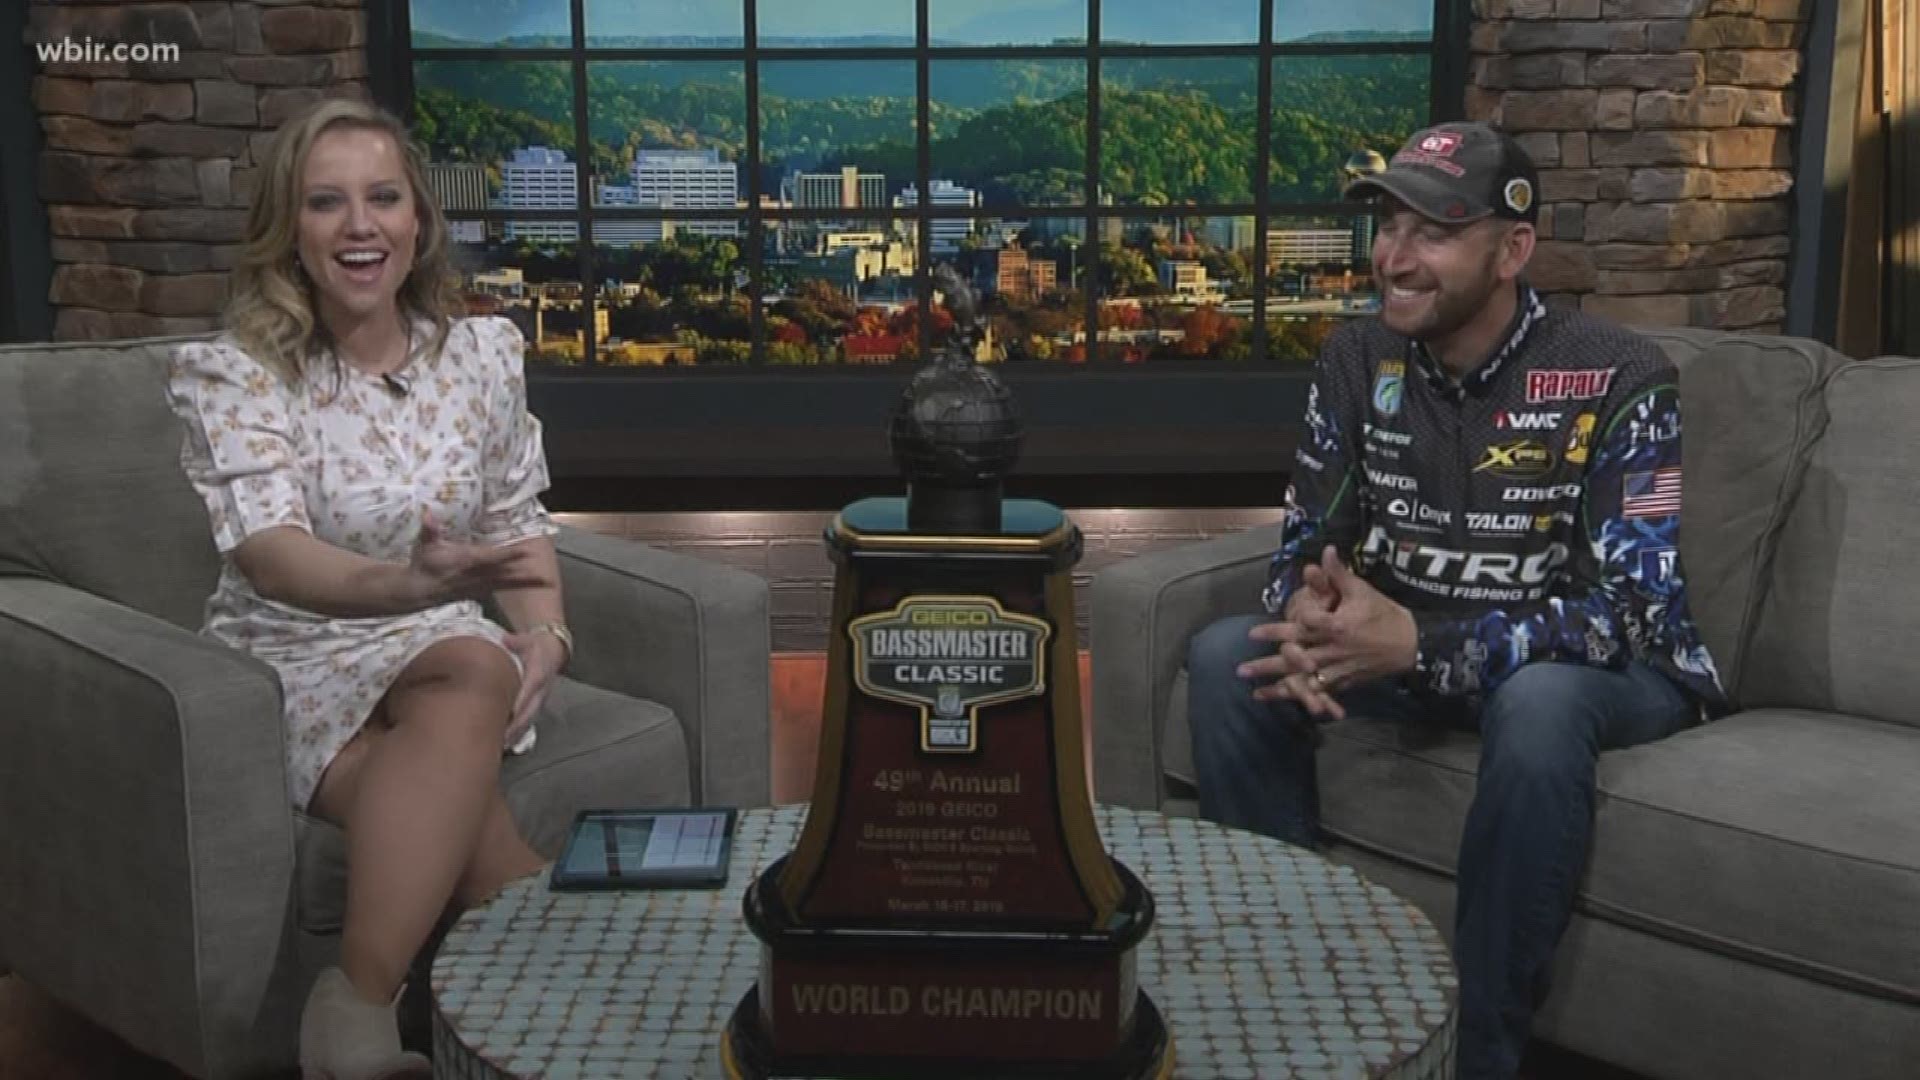 Ott Defoe joins us in the studio to talk about his big win at the 2019 Bassmaster Classic.